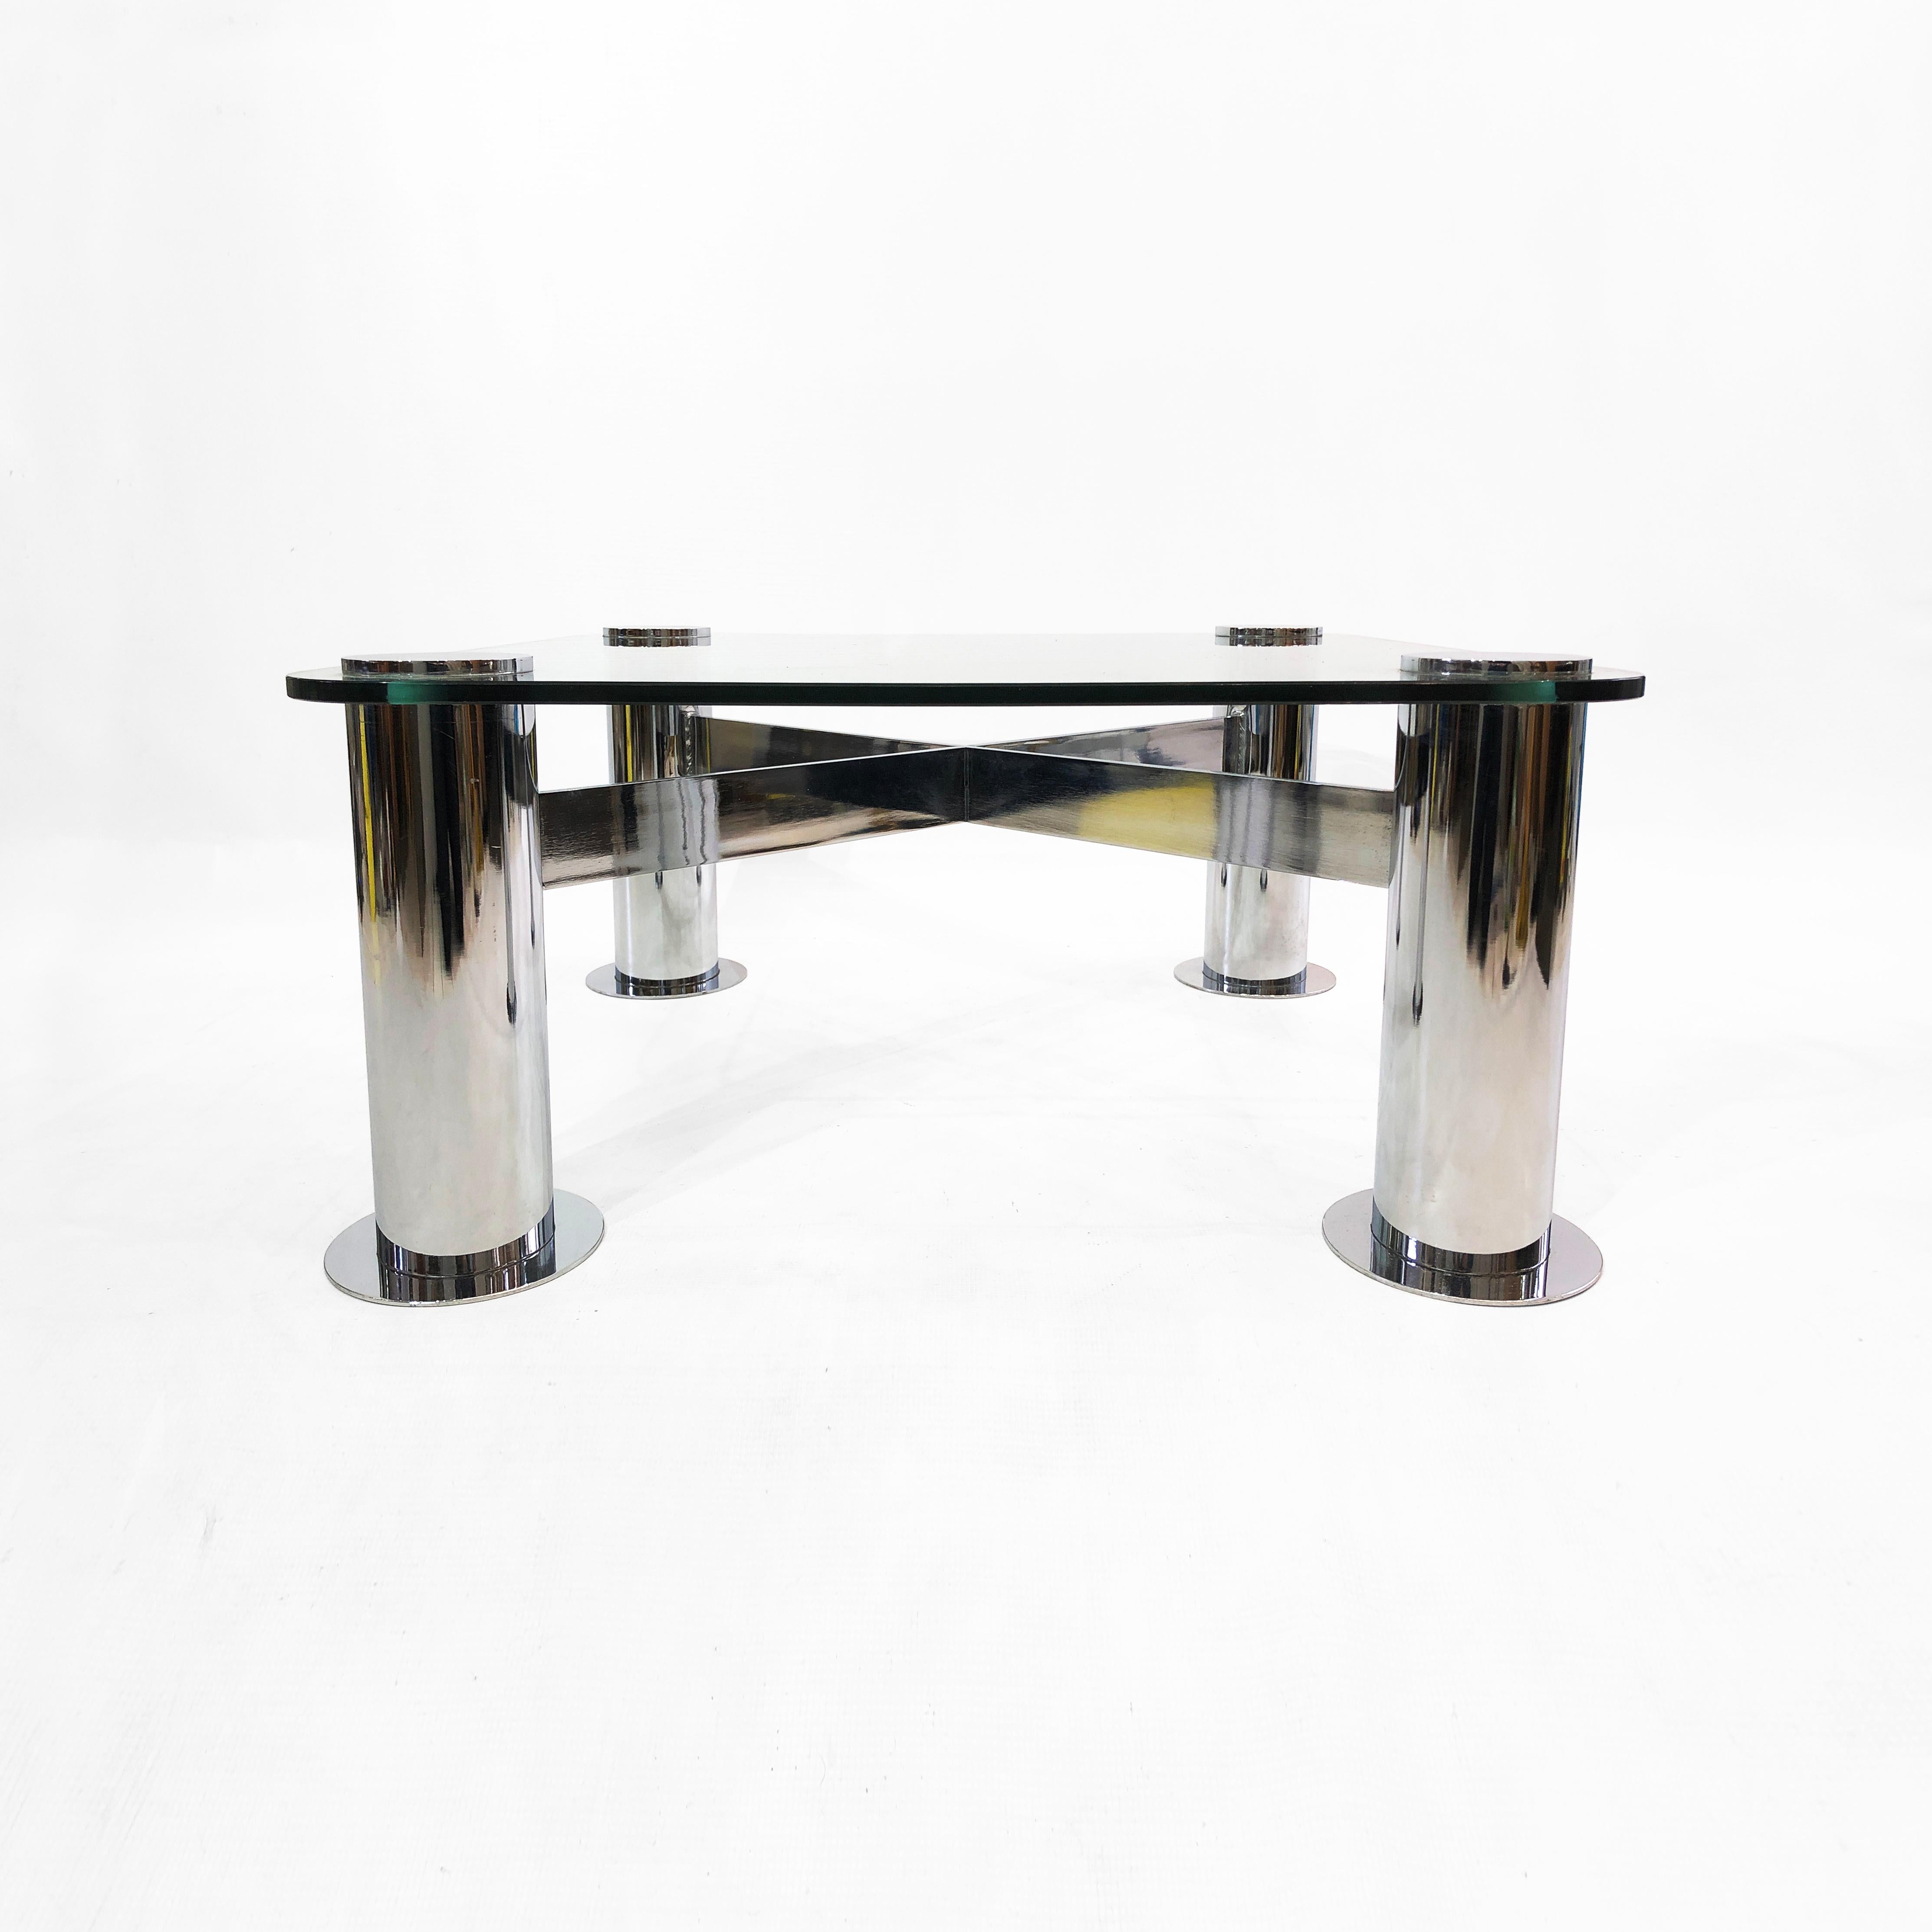 A stunning post-modern chrome and glass coffee table, by Leon Rosen for Pace Collection. The piece, takes its cues from the structural expressionism architectural movement reminiscent of bold buildings of the era. It consists of an interlocking